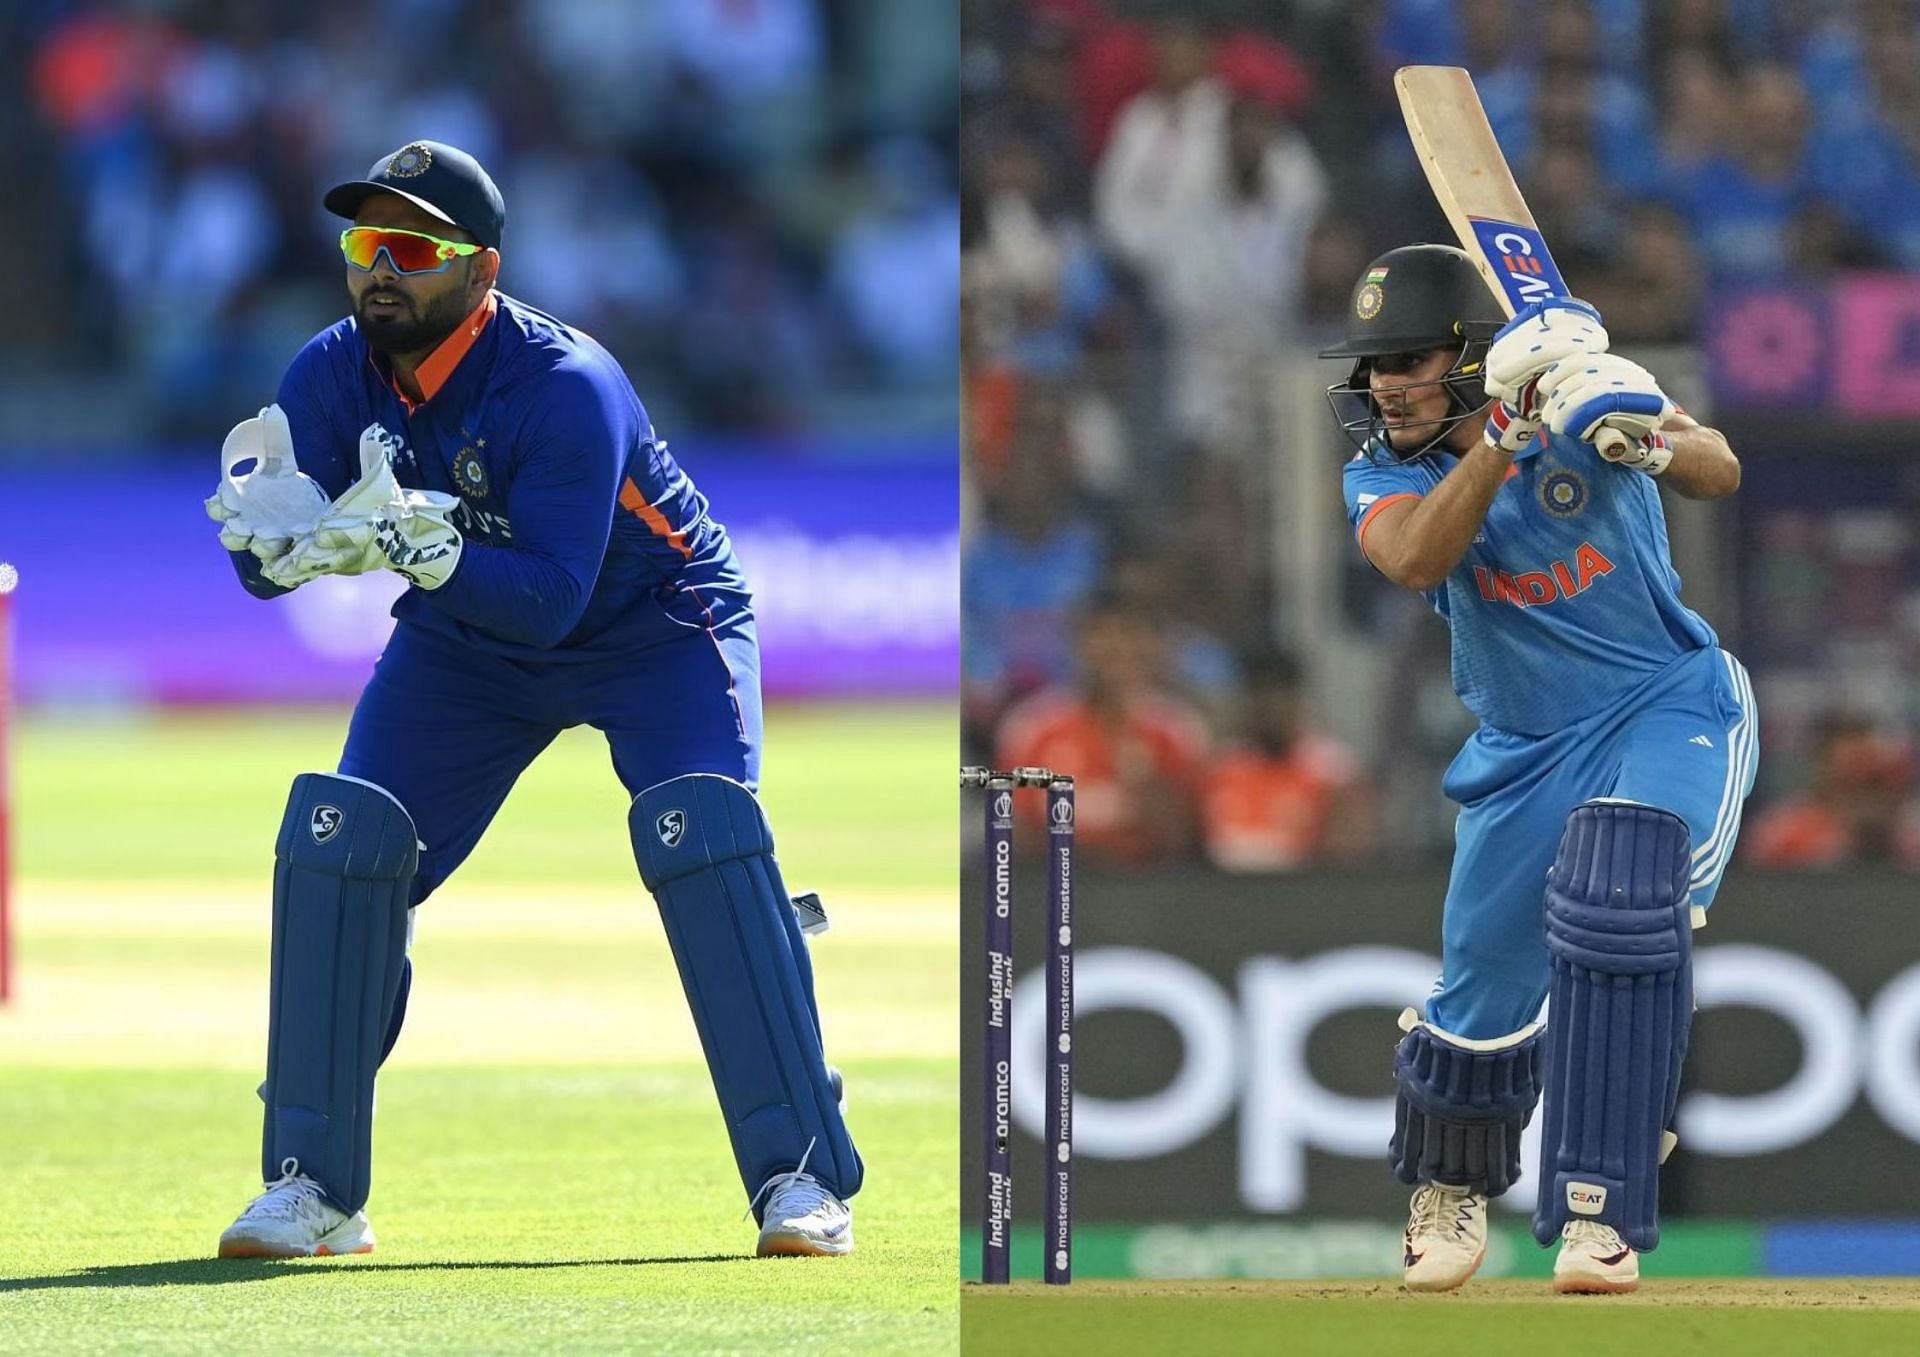 Rishabh Pant and Shubman Gill - future Olympic medalists? (Picture Credits: Getty; AP).